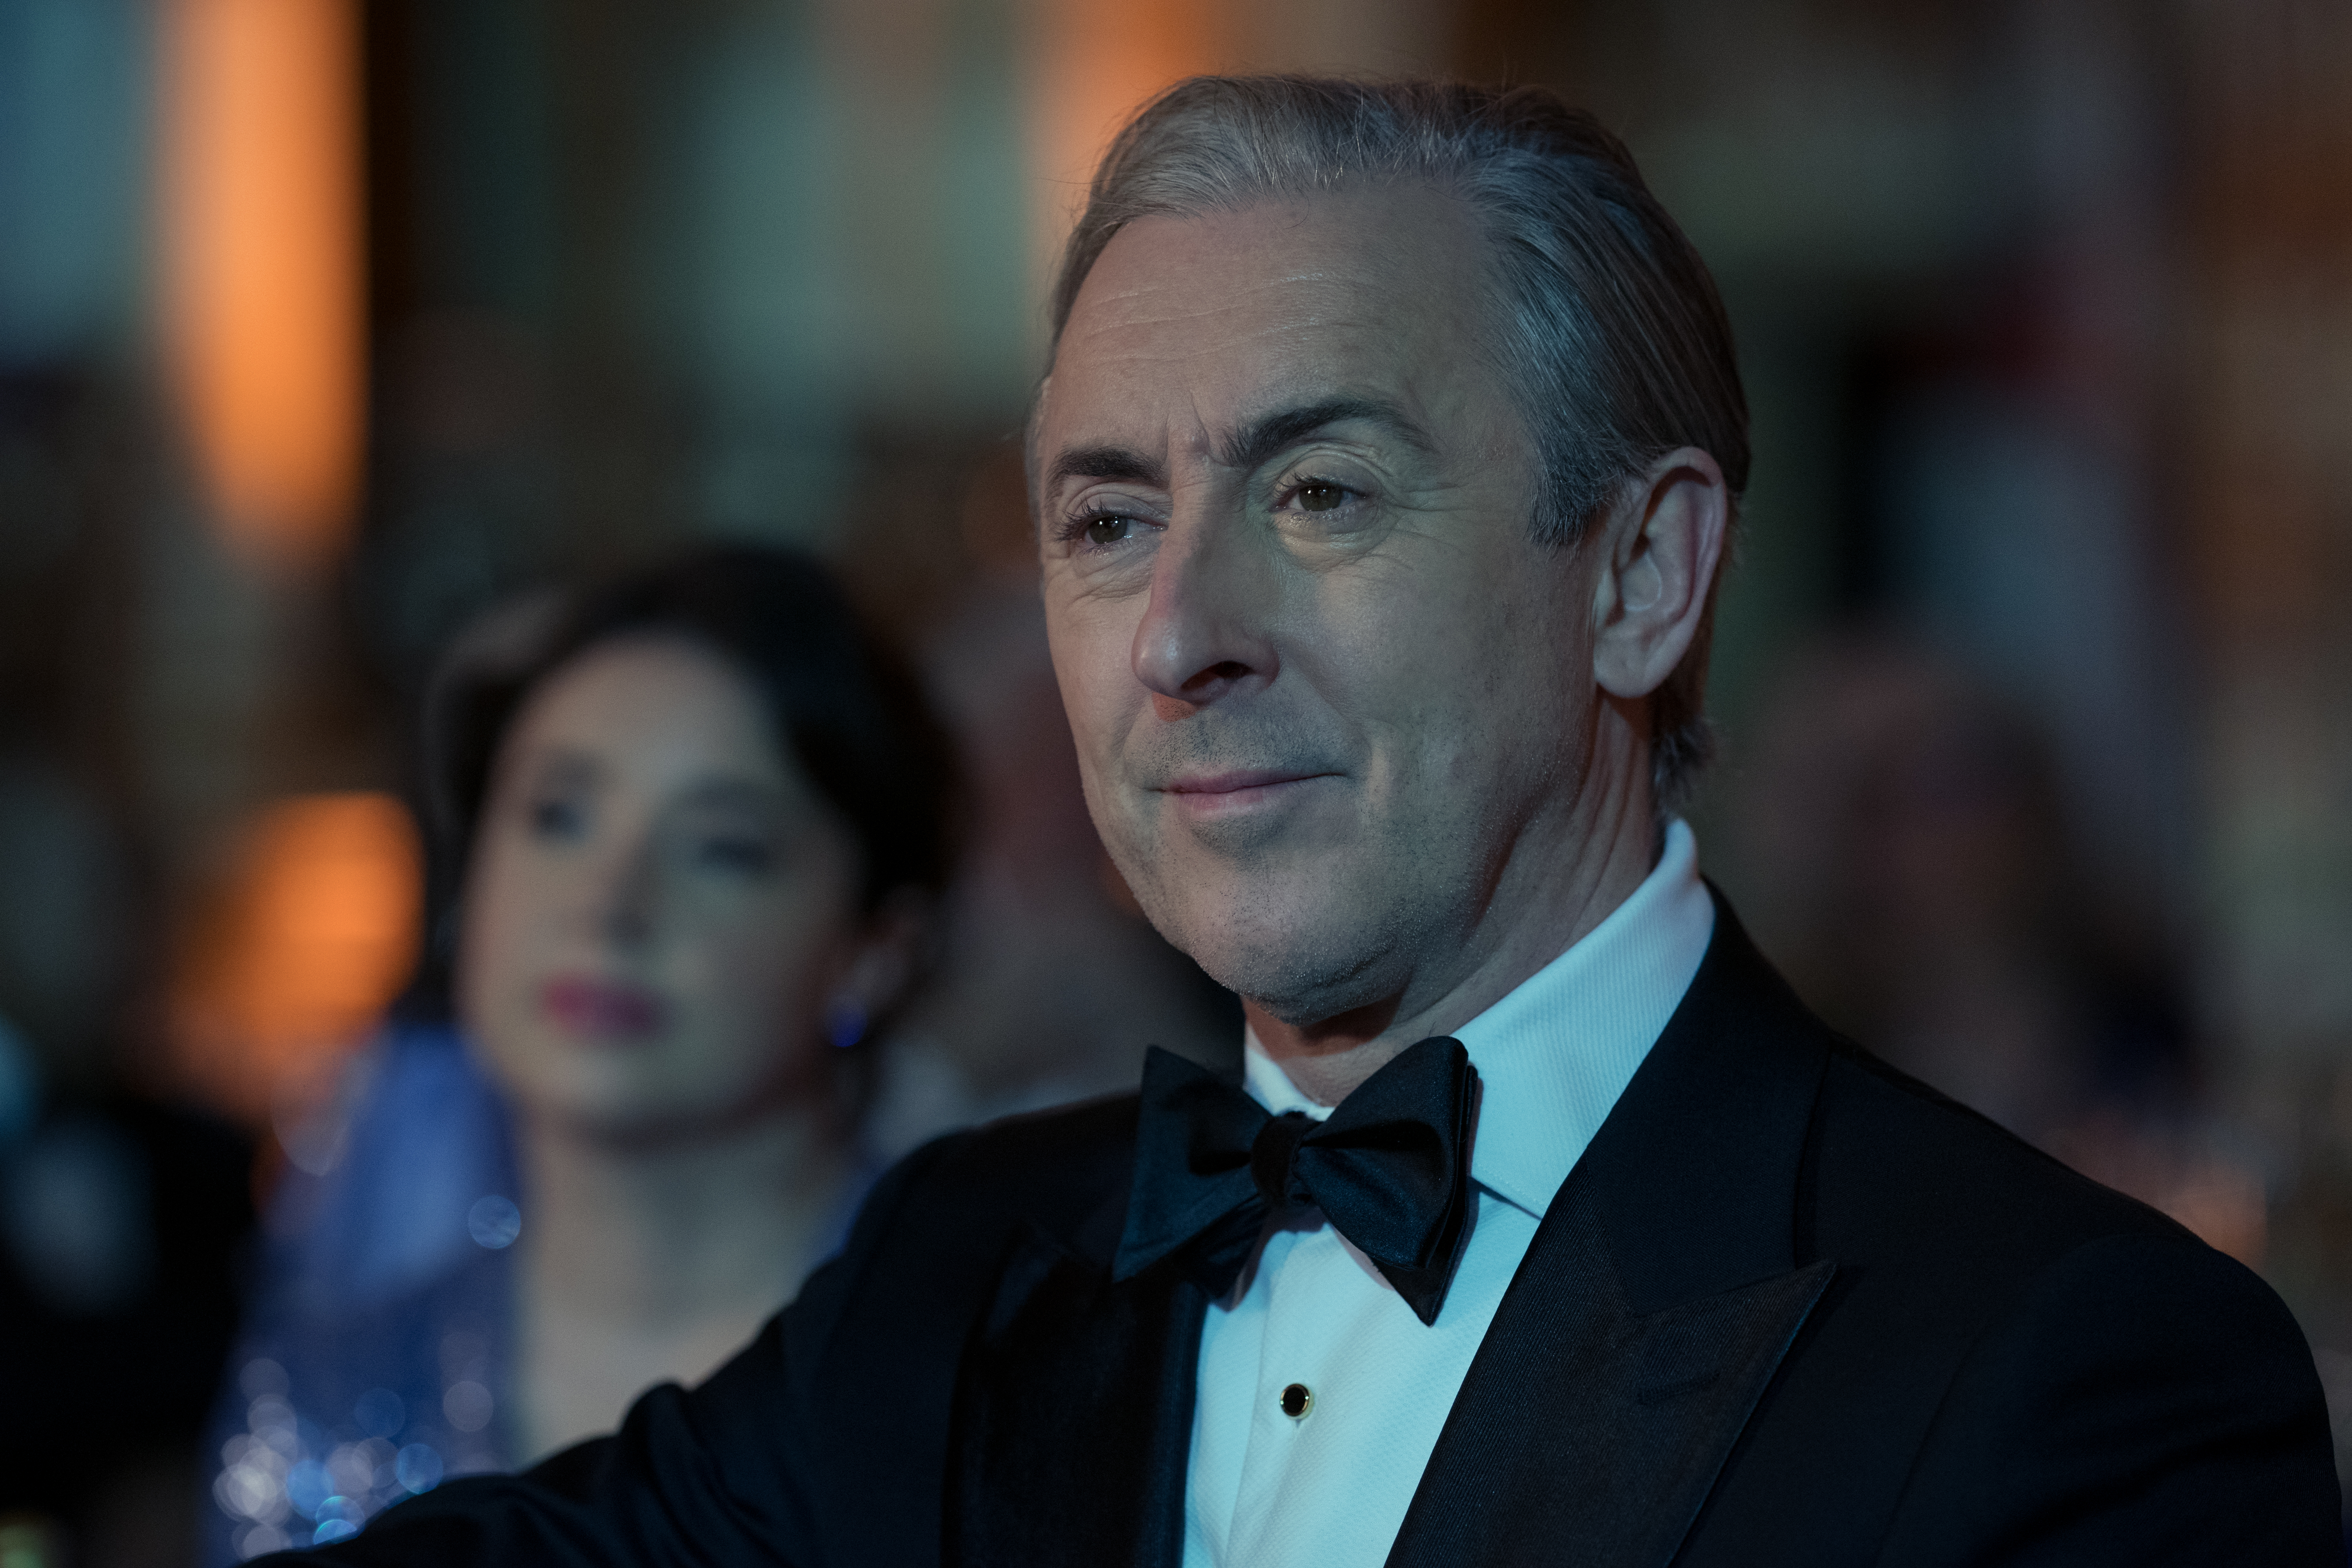 The Good Fight 6x04 "The End of Eli Gold" Alan Cumming as Eli Gold